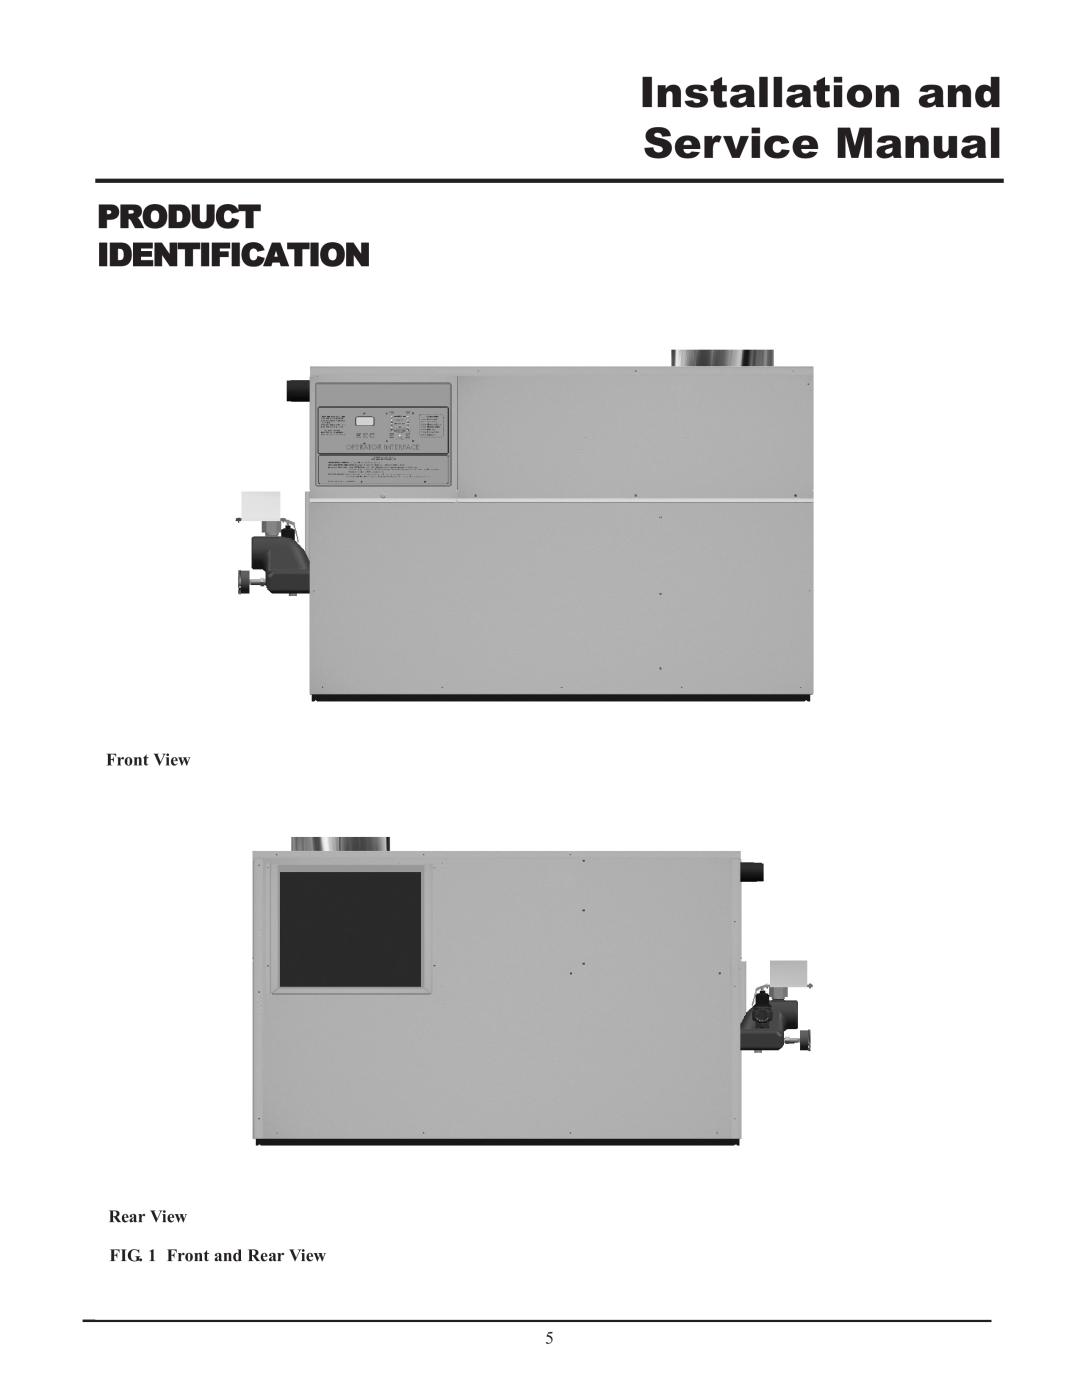 Lochinvar 399, 999 - 750 Product Identification, Front View Rear View Front and Rear View, Installation and Service Manual 